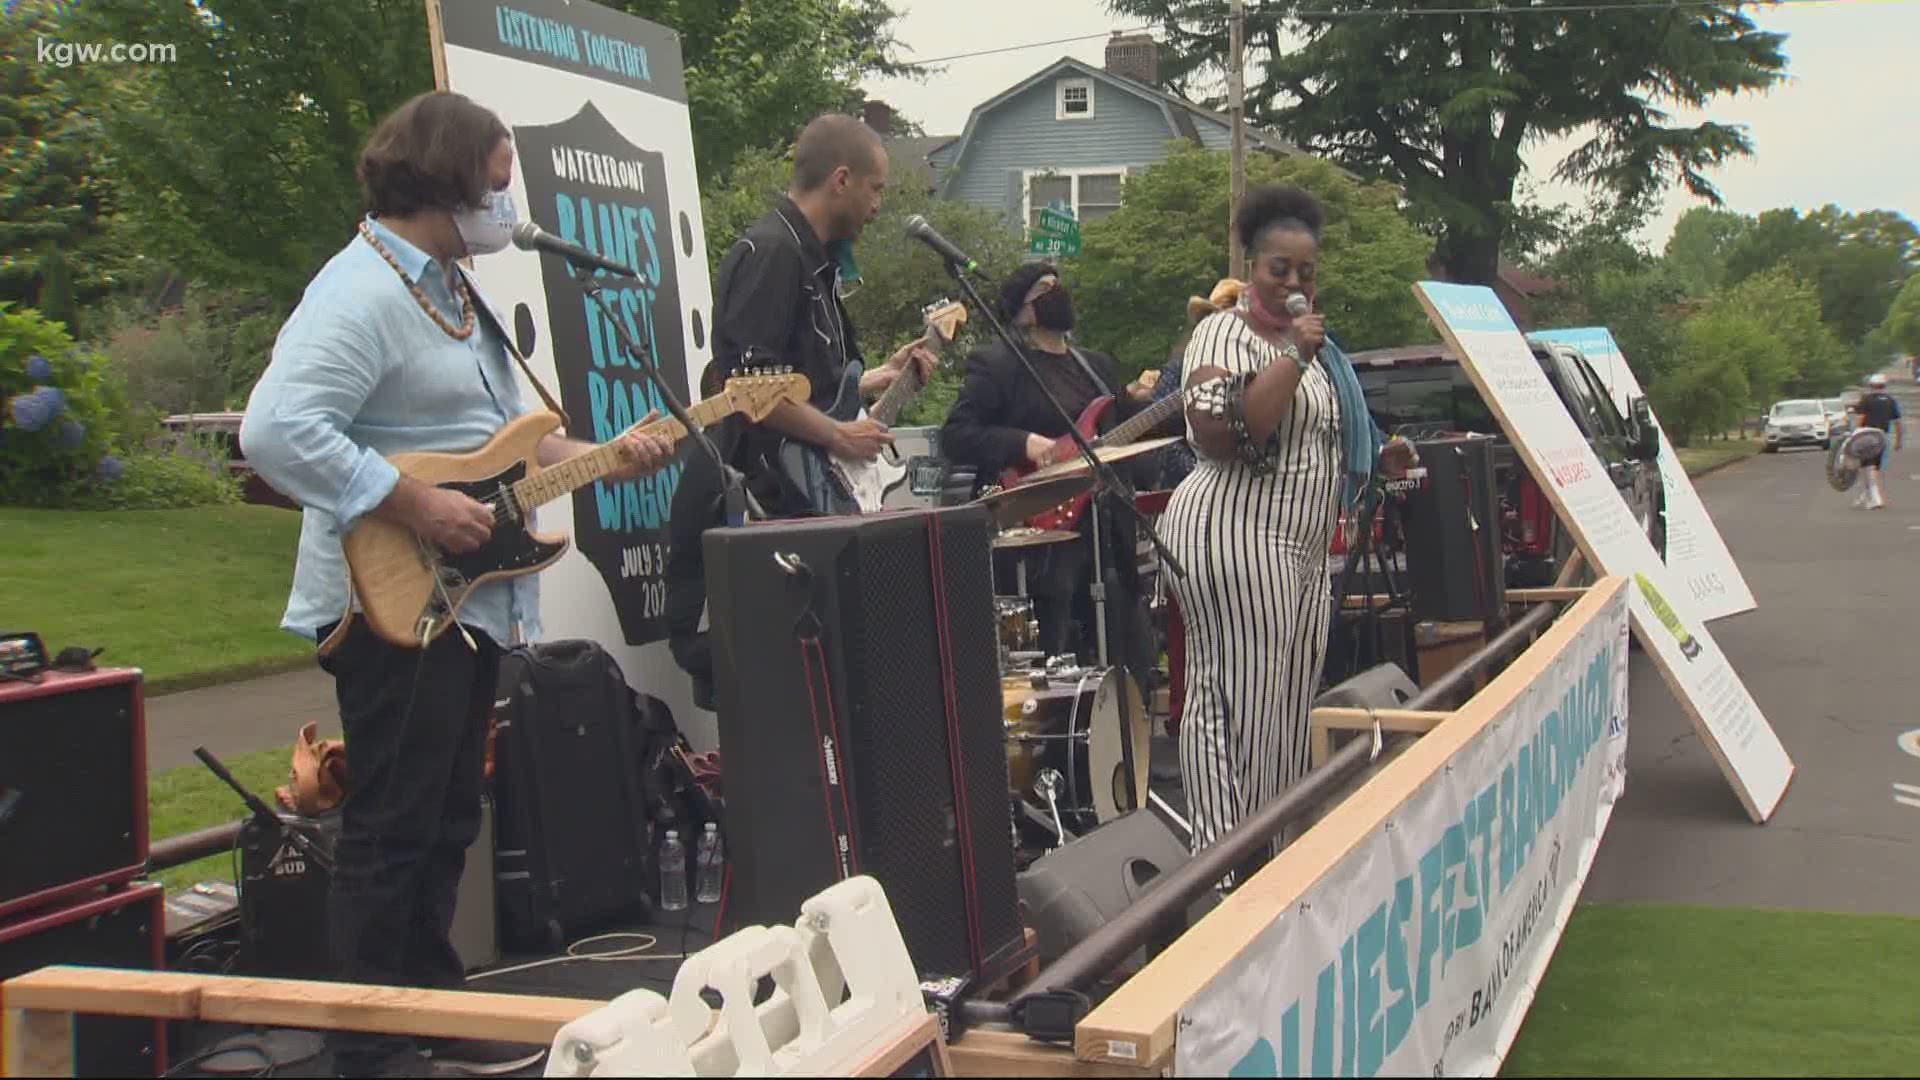 The Waterfront Blues Fest Bandwagon will bring live music to front line heroes' driveways, front yards and porches in the Portland metro area.